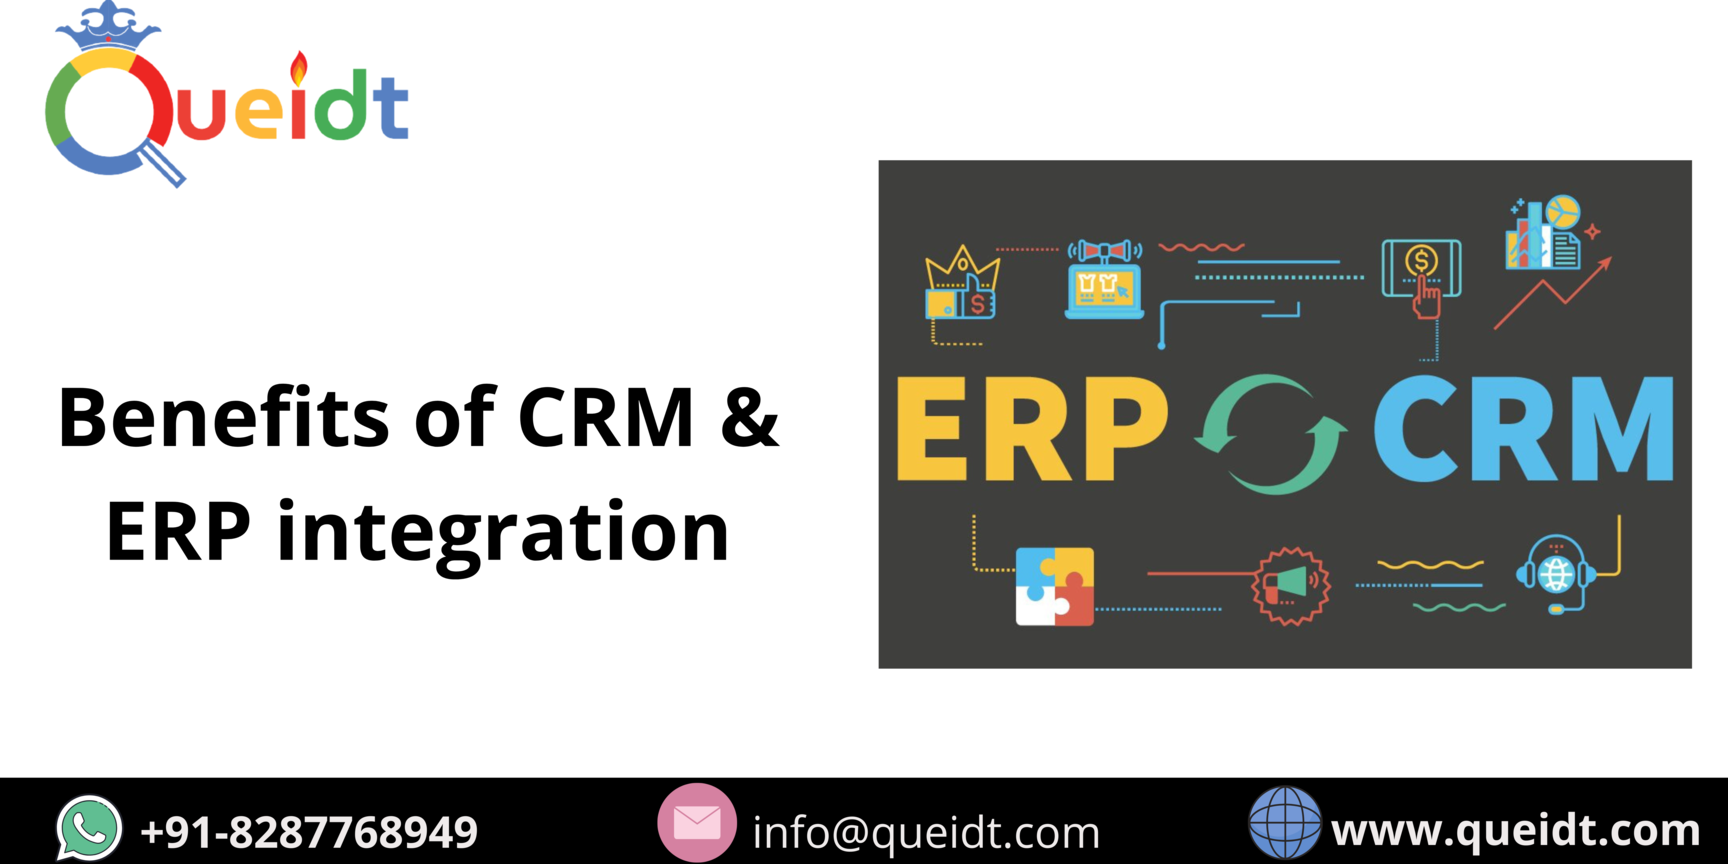 Benefits of CRM and ERP integration